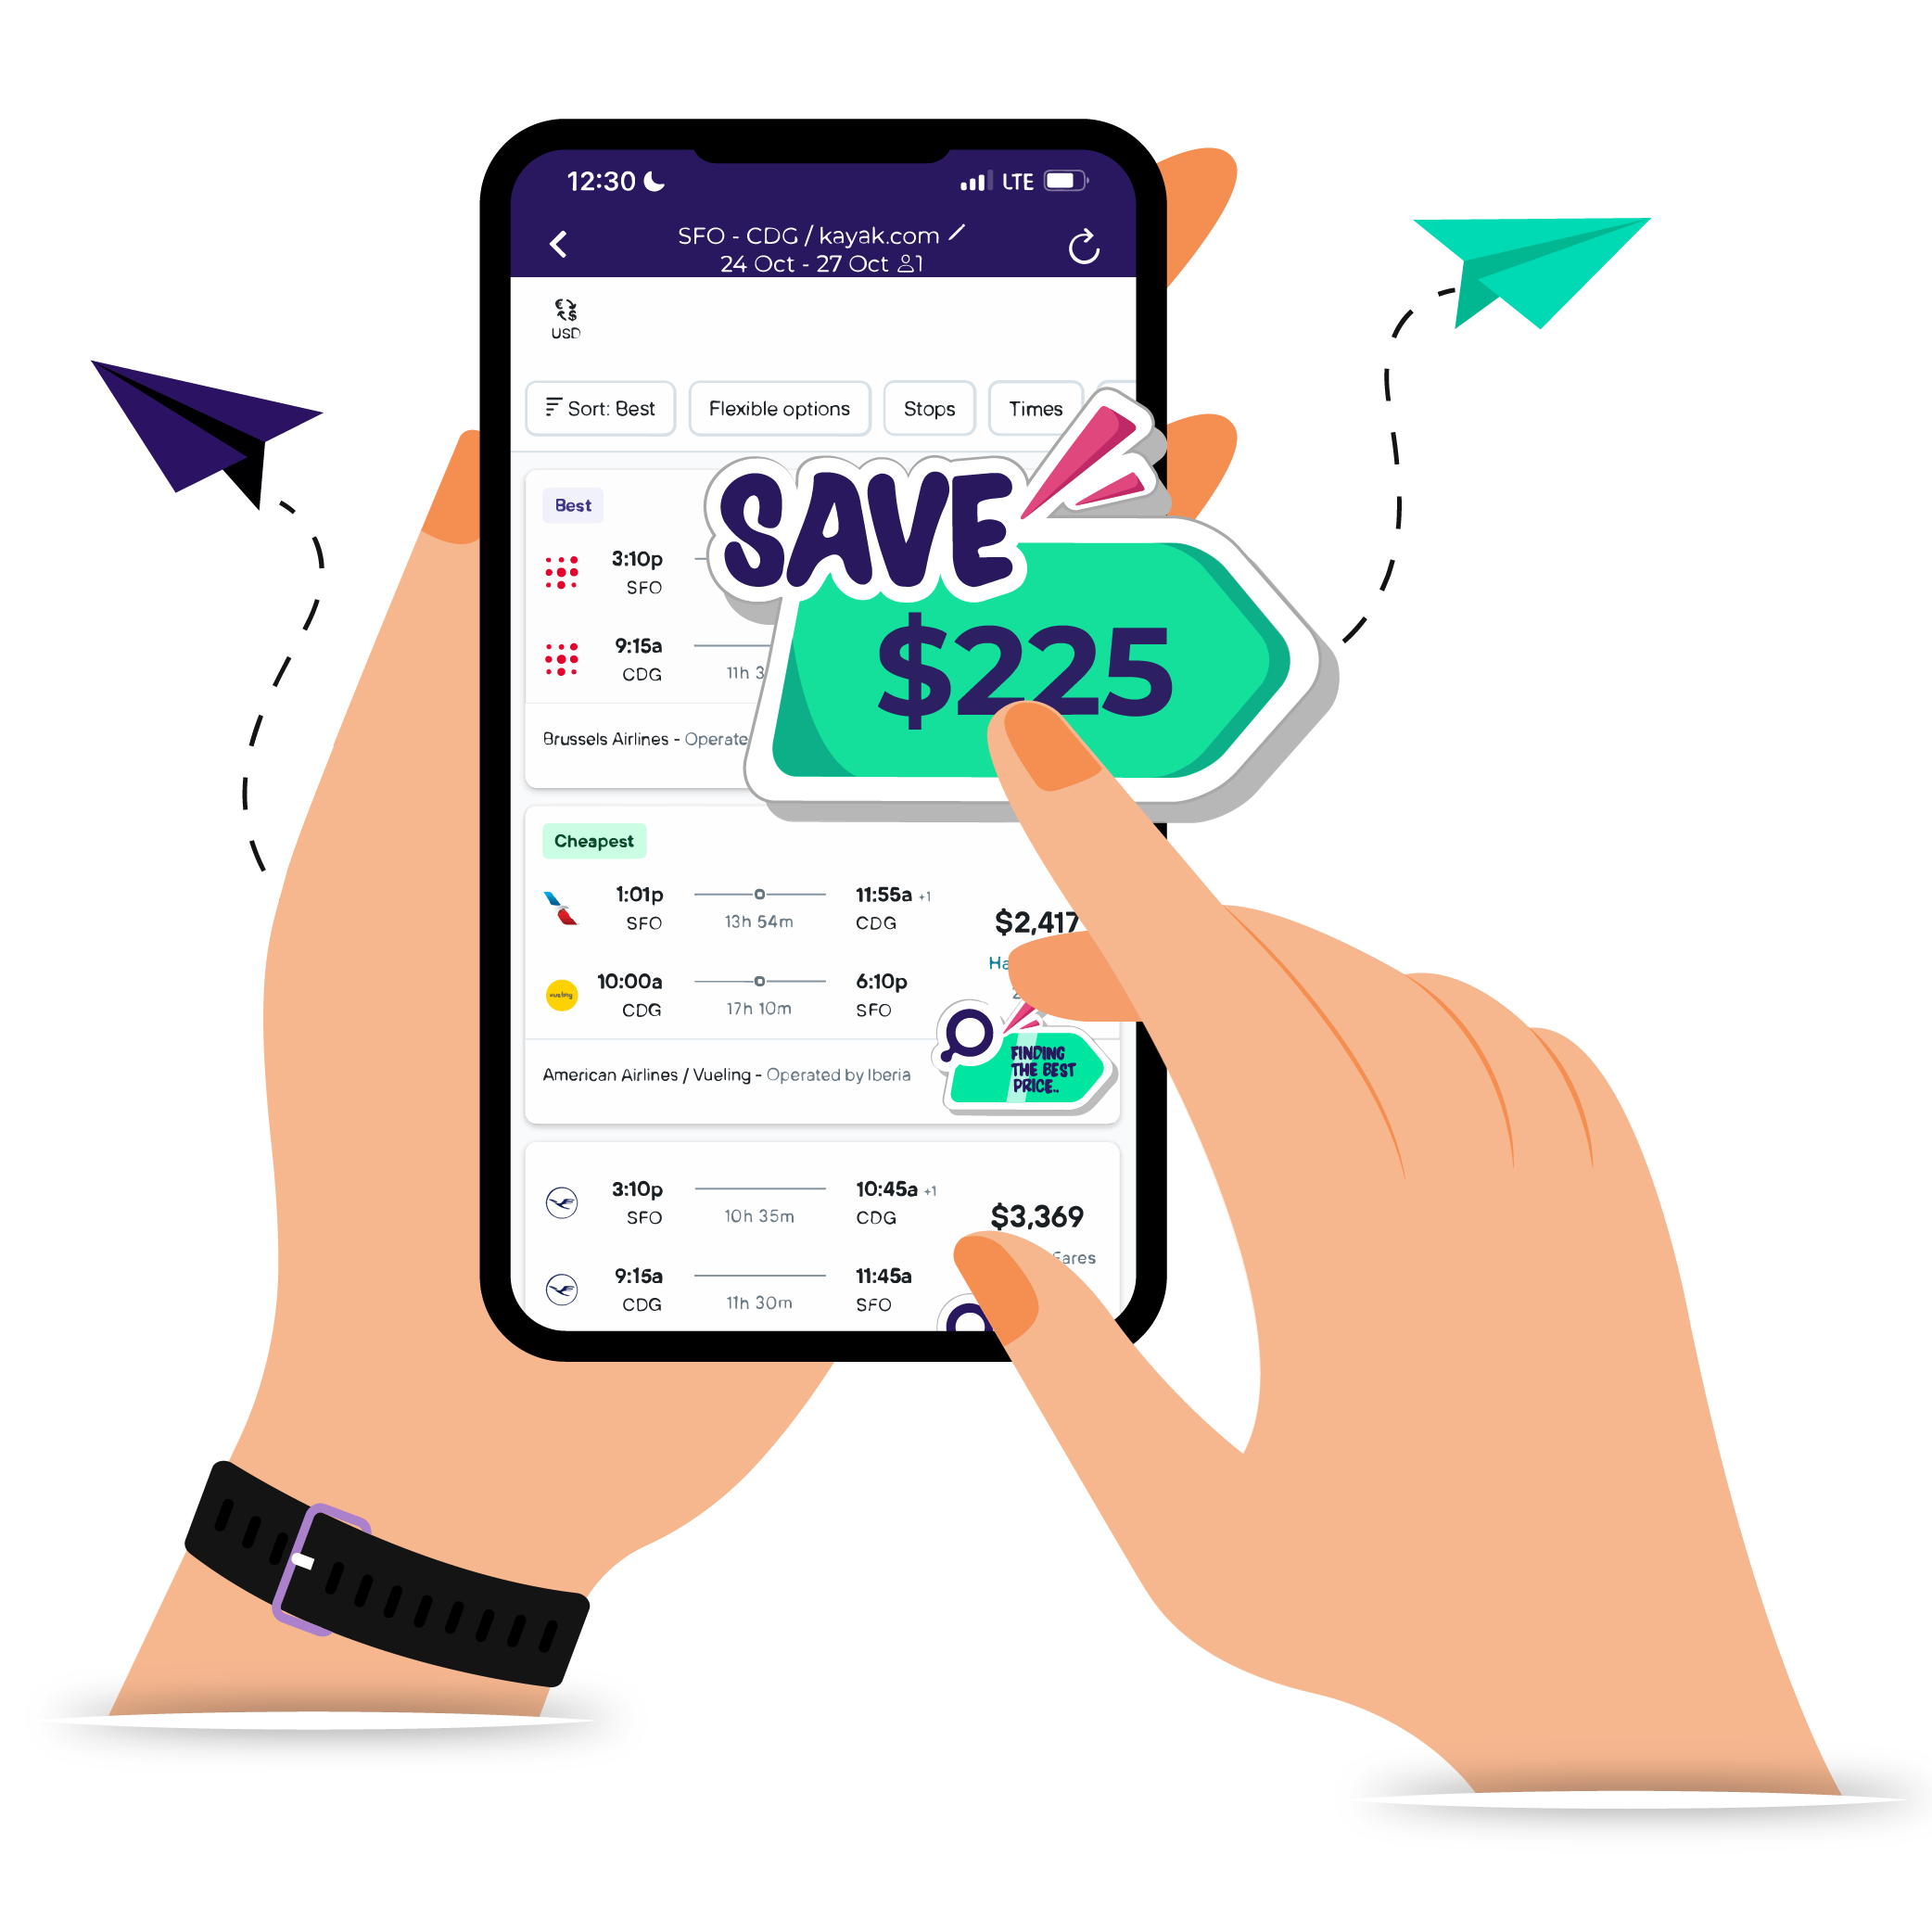 using Twistr is so easy, it only takes a few seconds to find the best price!